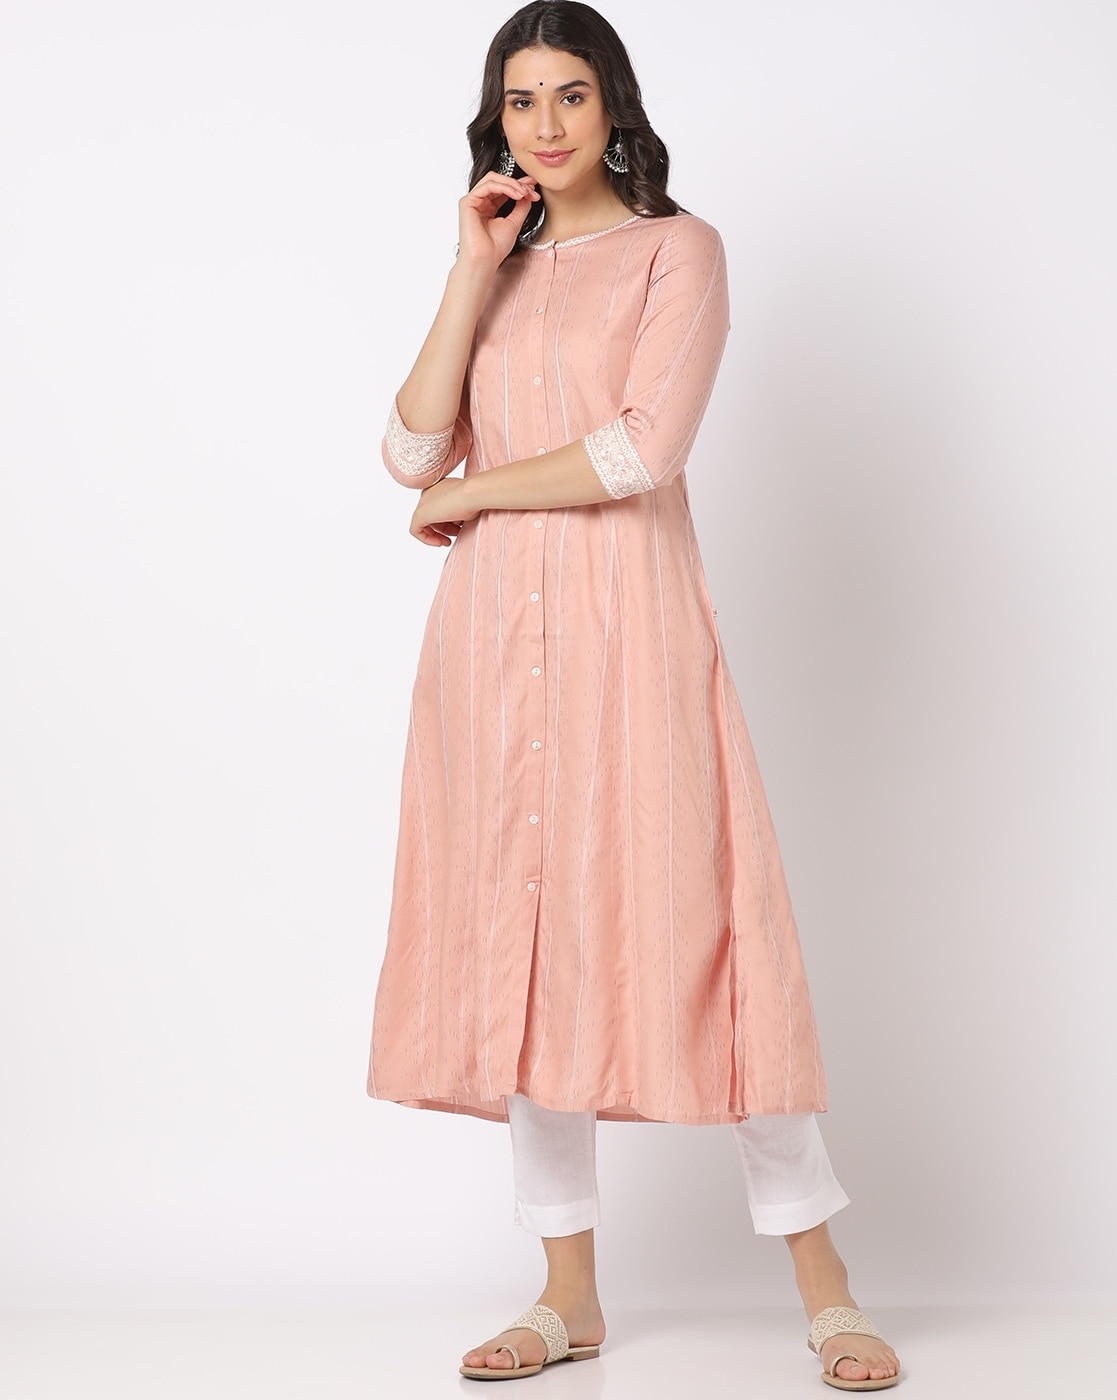 AVAASA MIX N MATCH By Reliance Trends Women Kurtis Upto 70% Discount Starts  From Rs.120